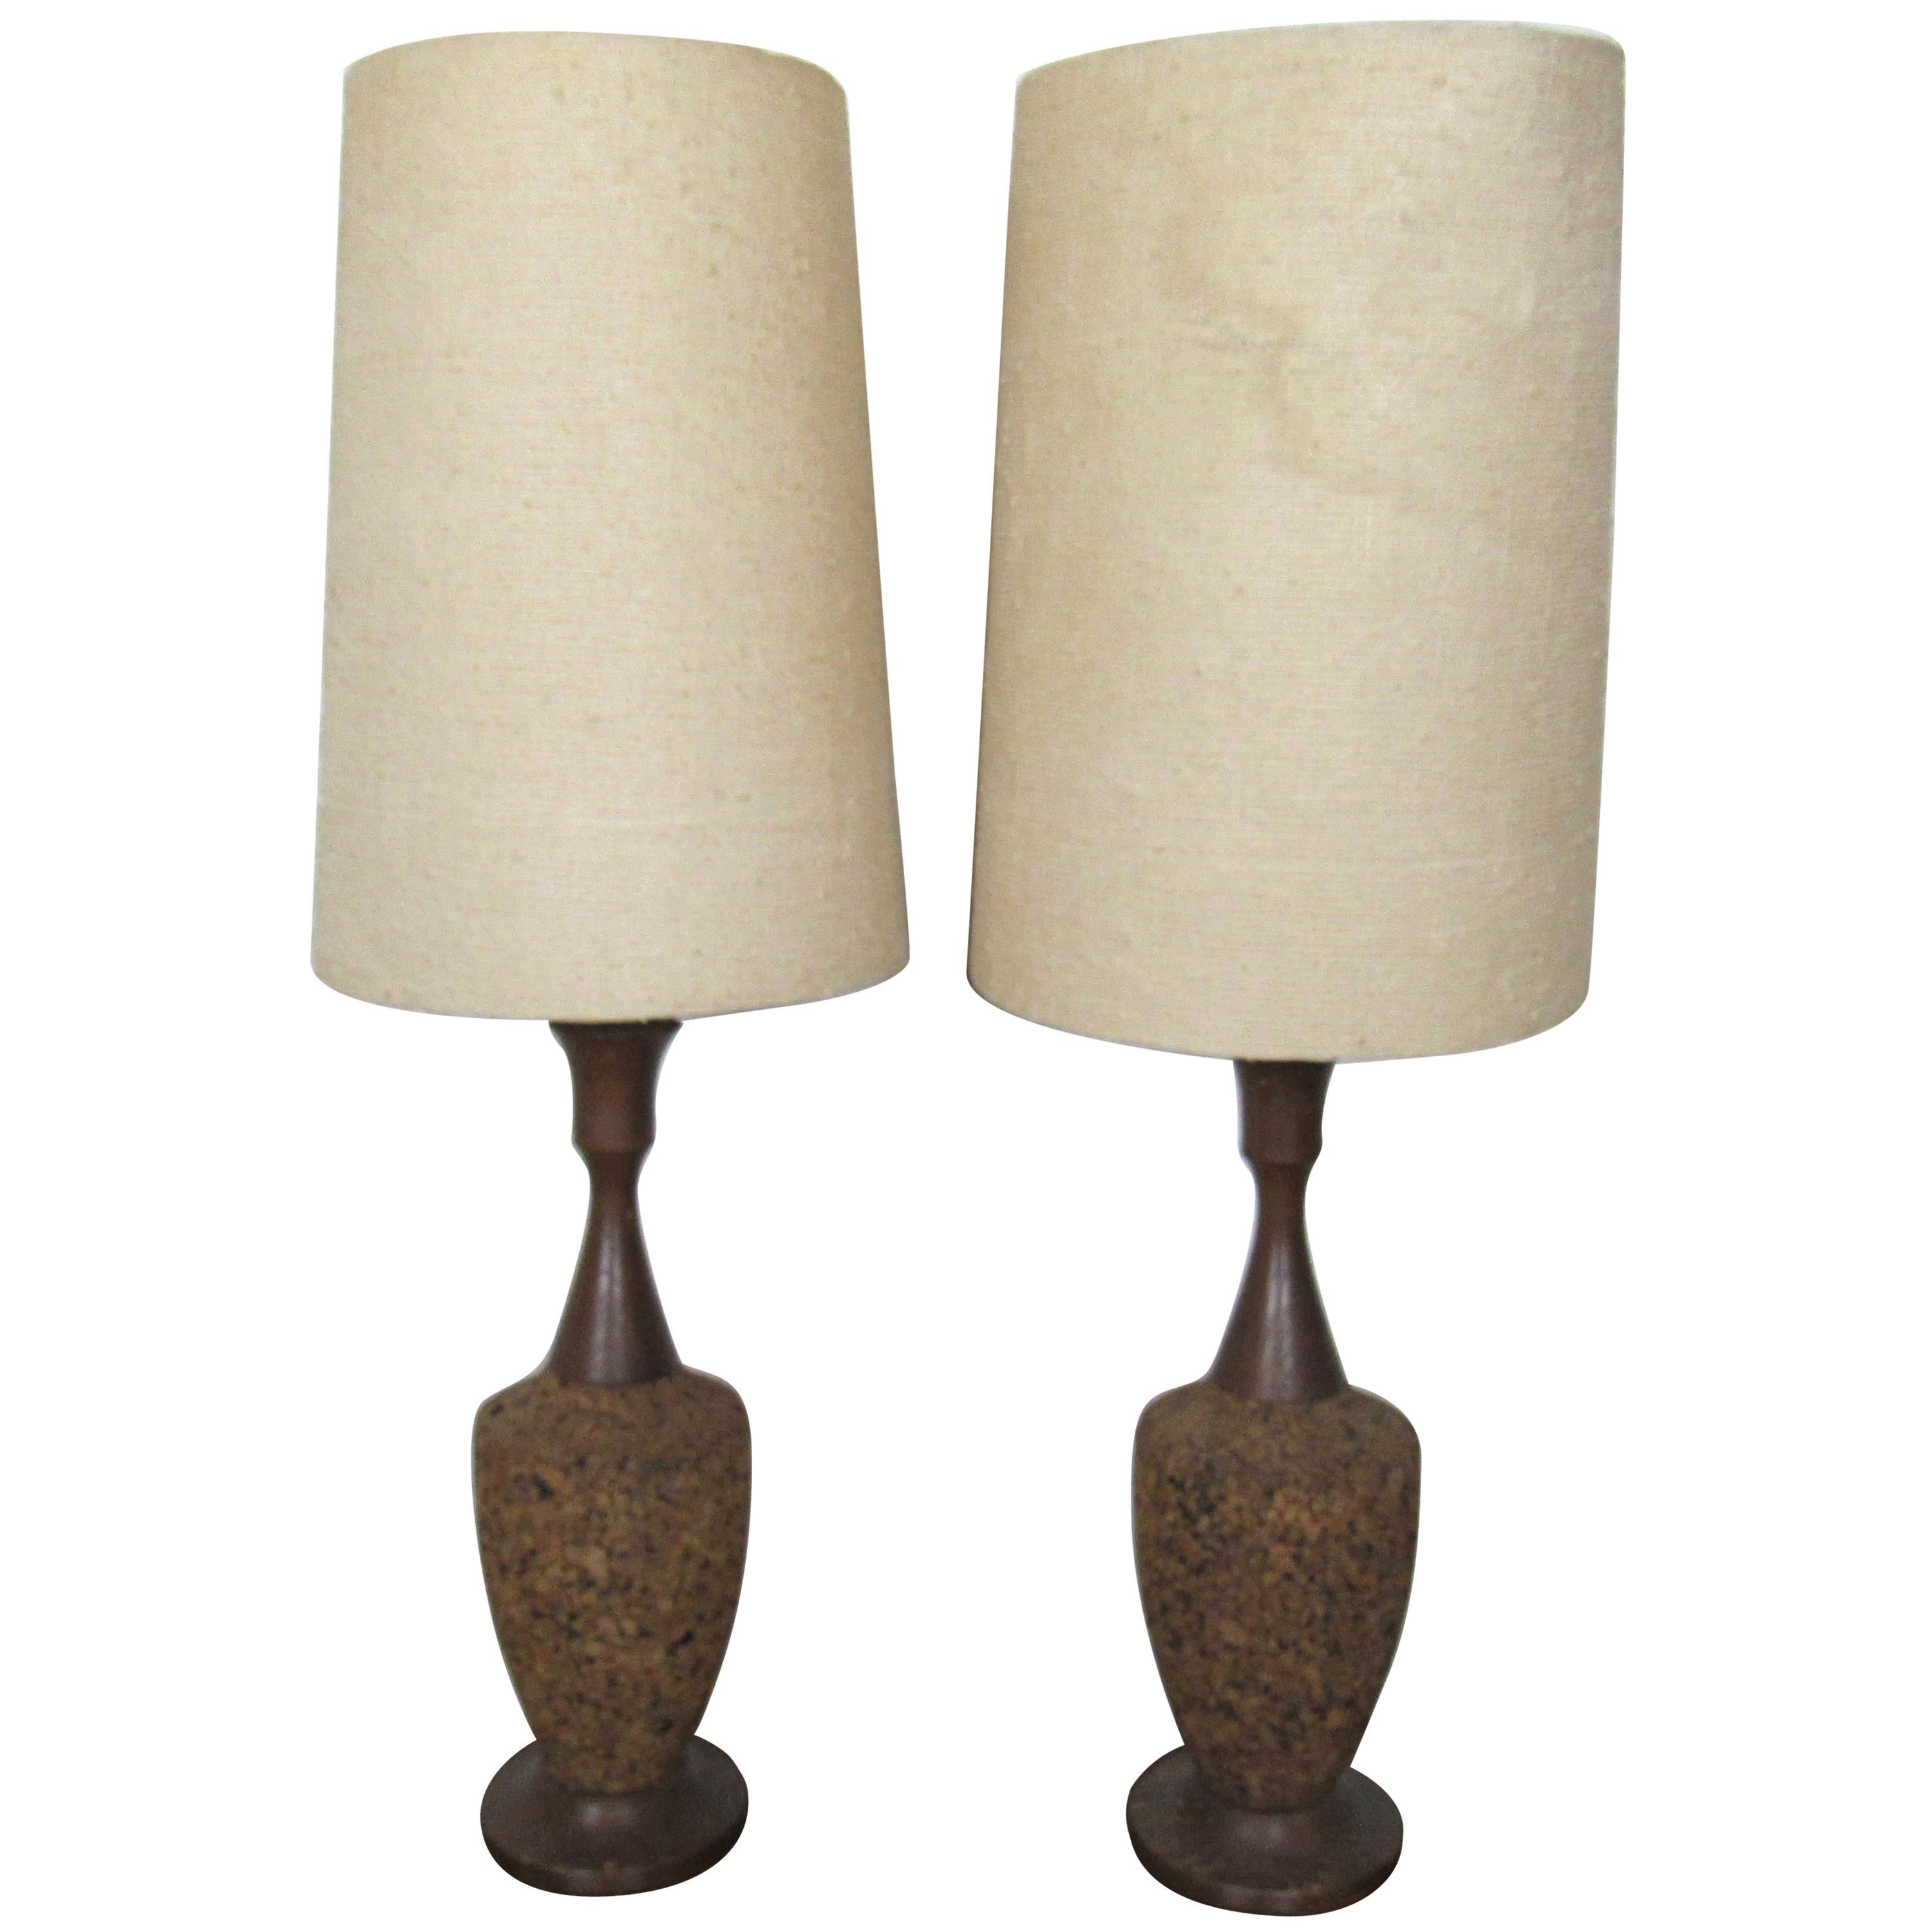 Pair of Cork Table Lamps